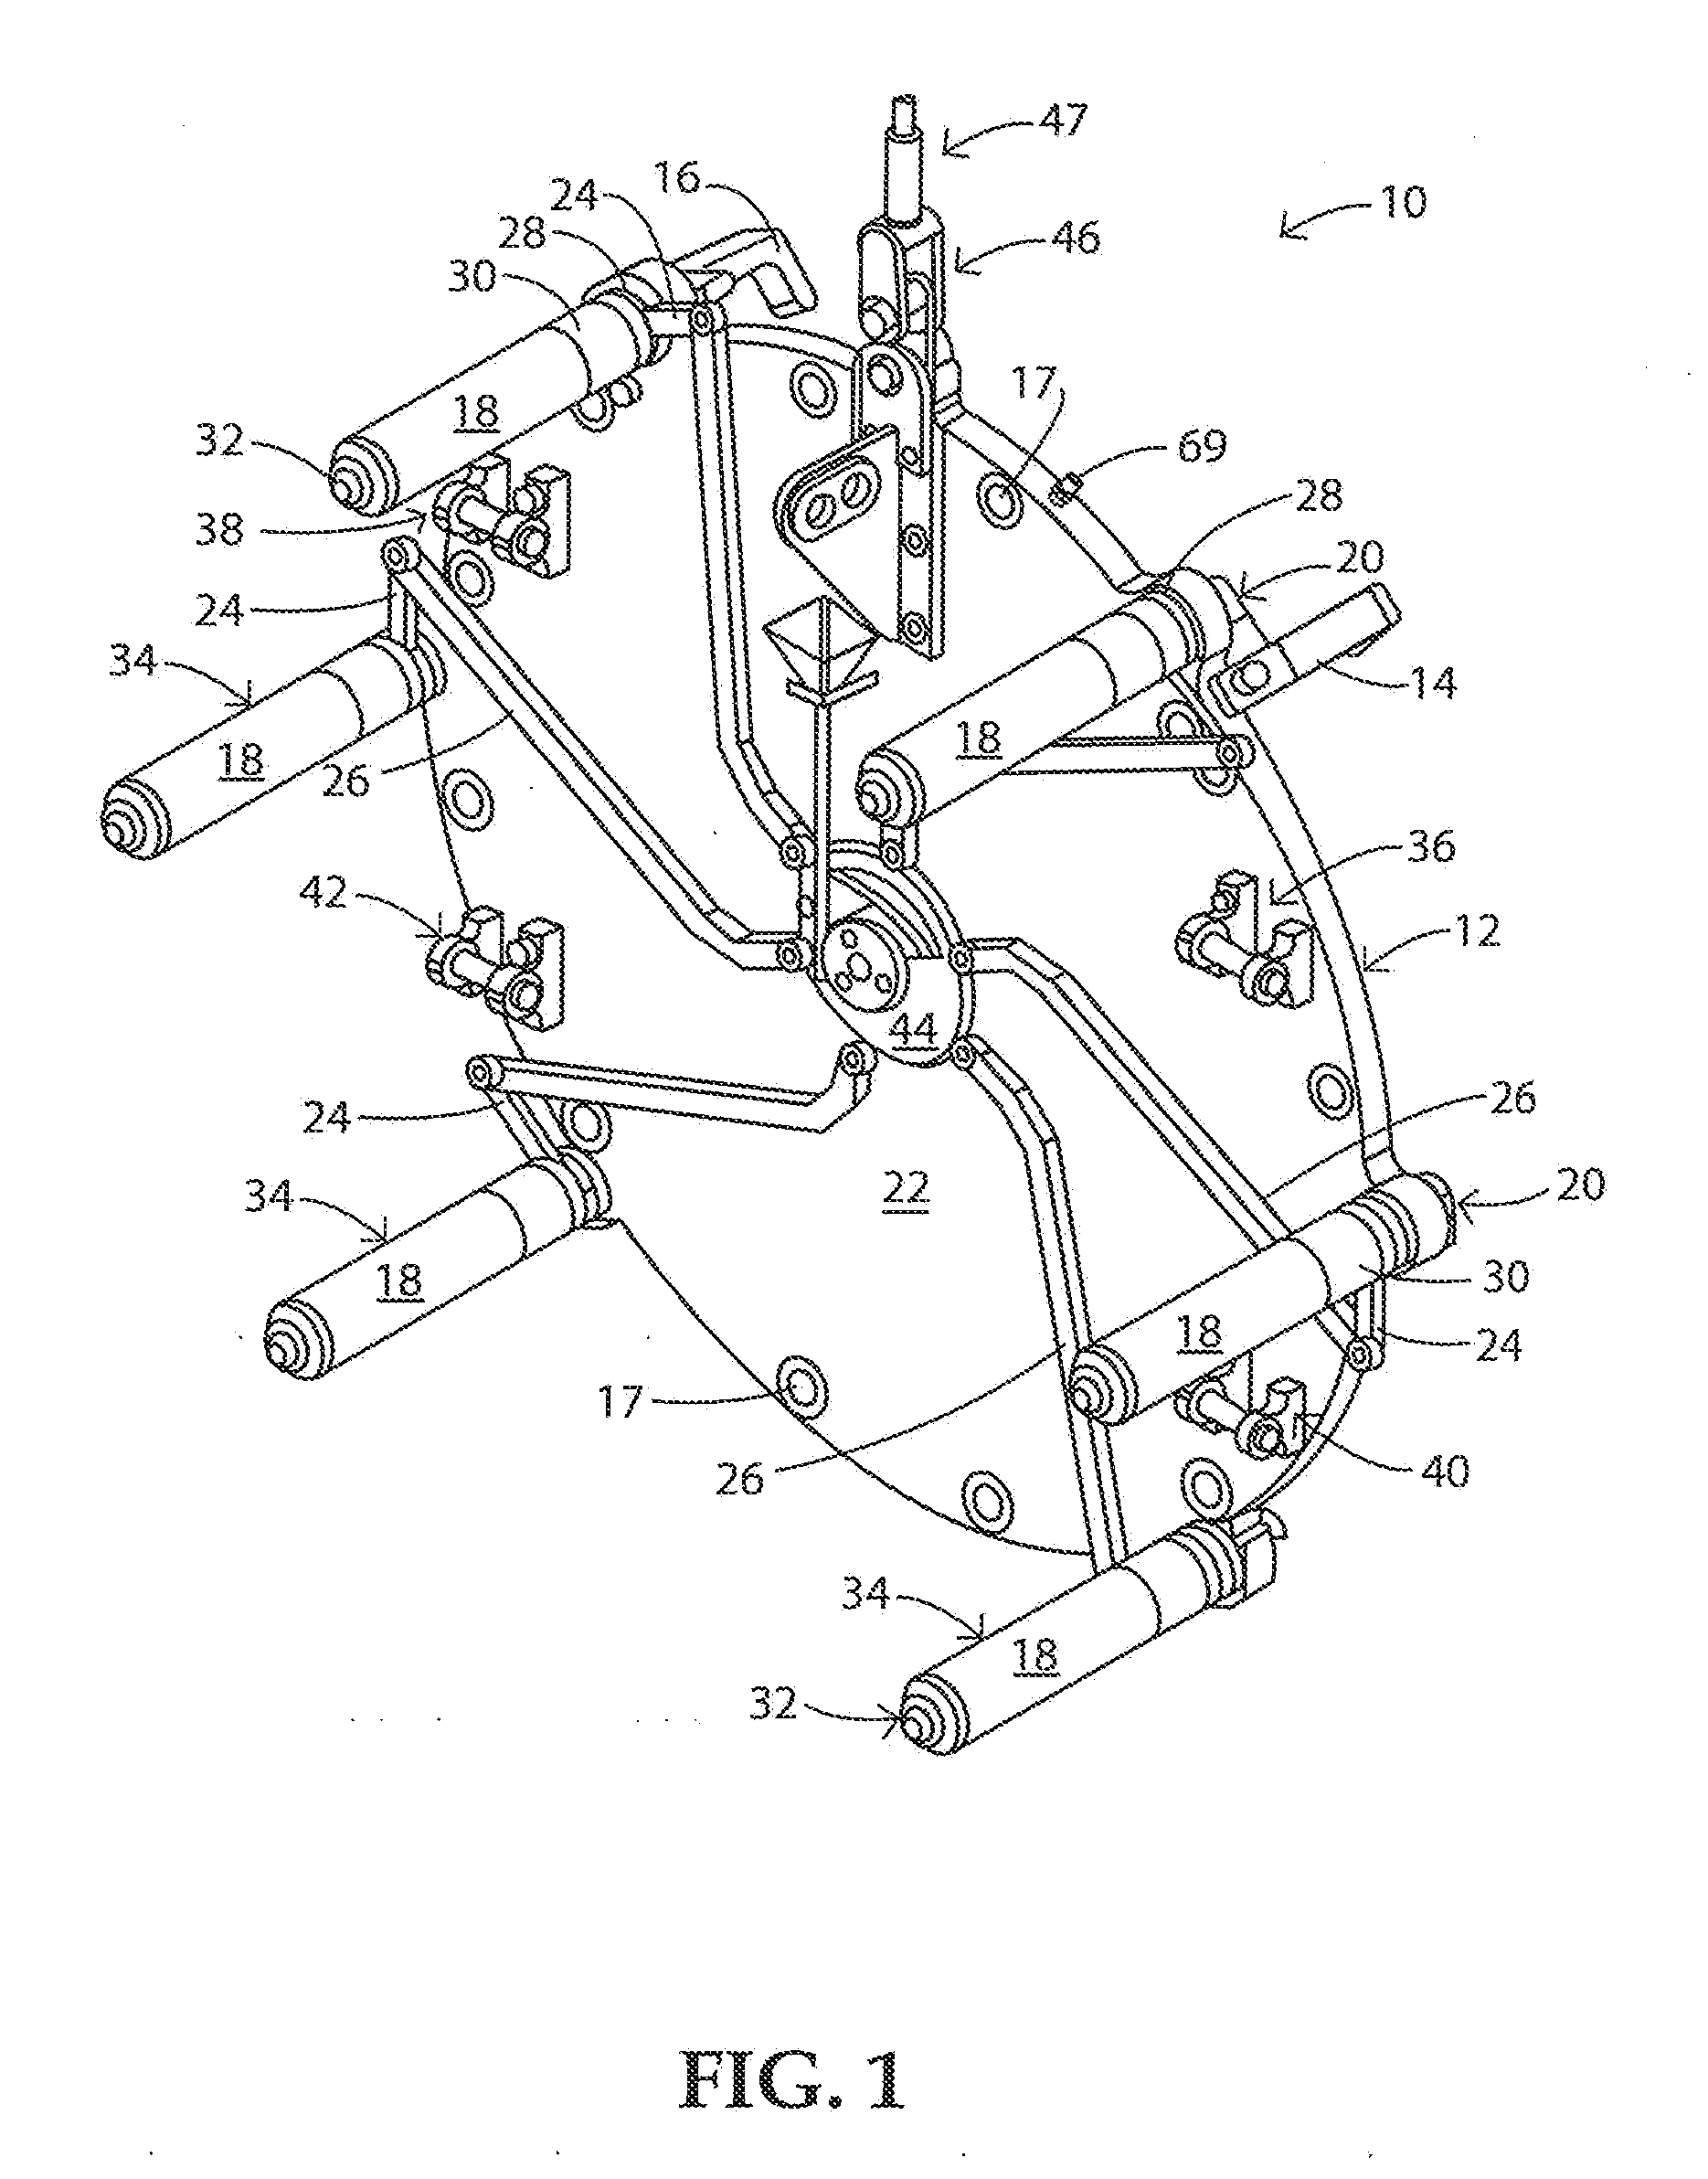 Remotely Installed Fuel Transfer Tube Closure System